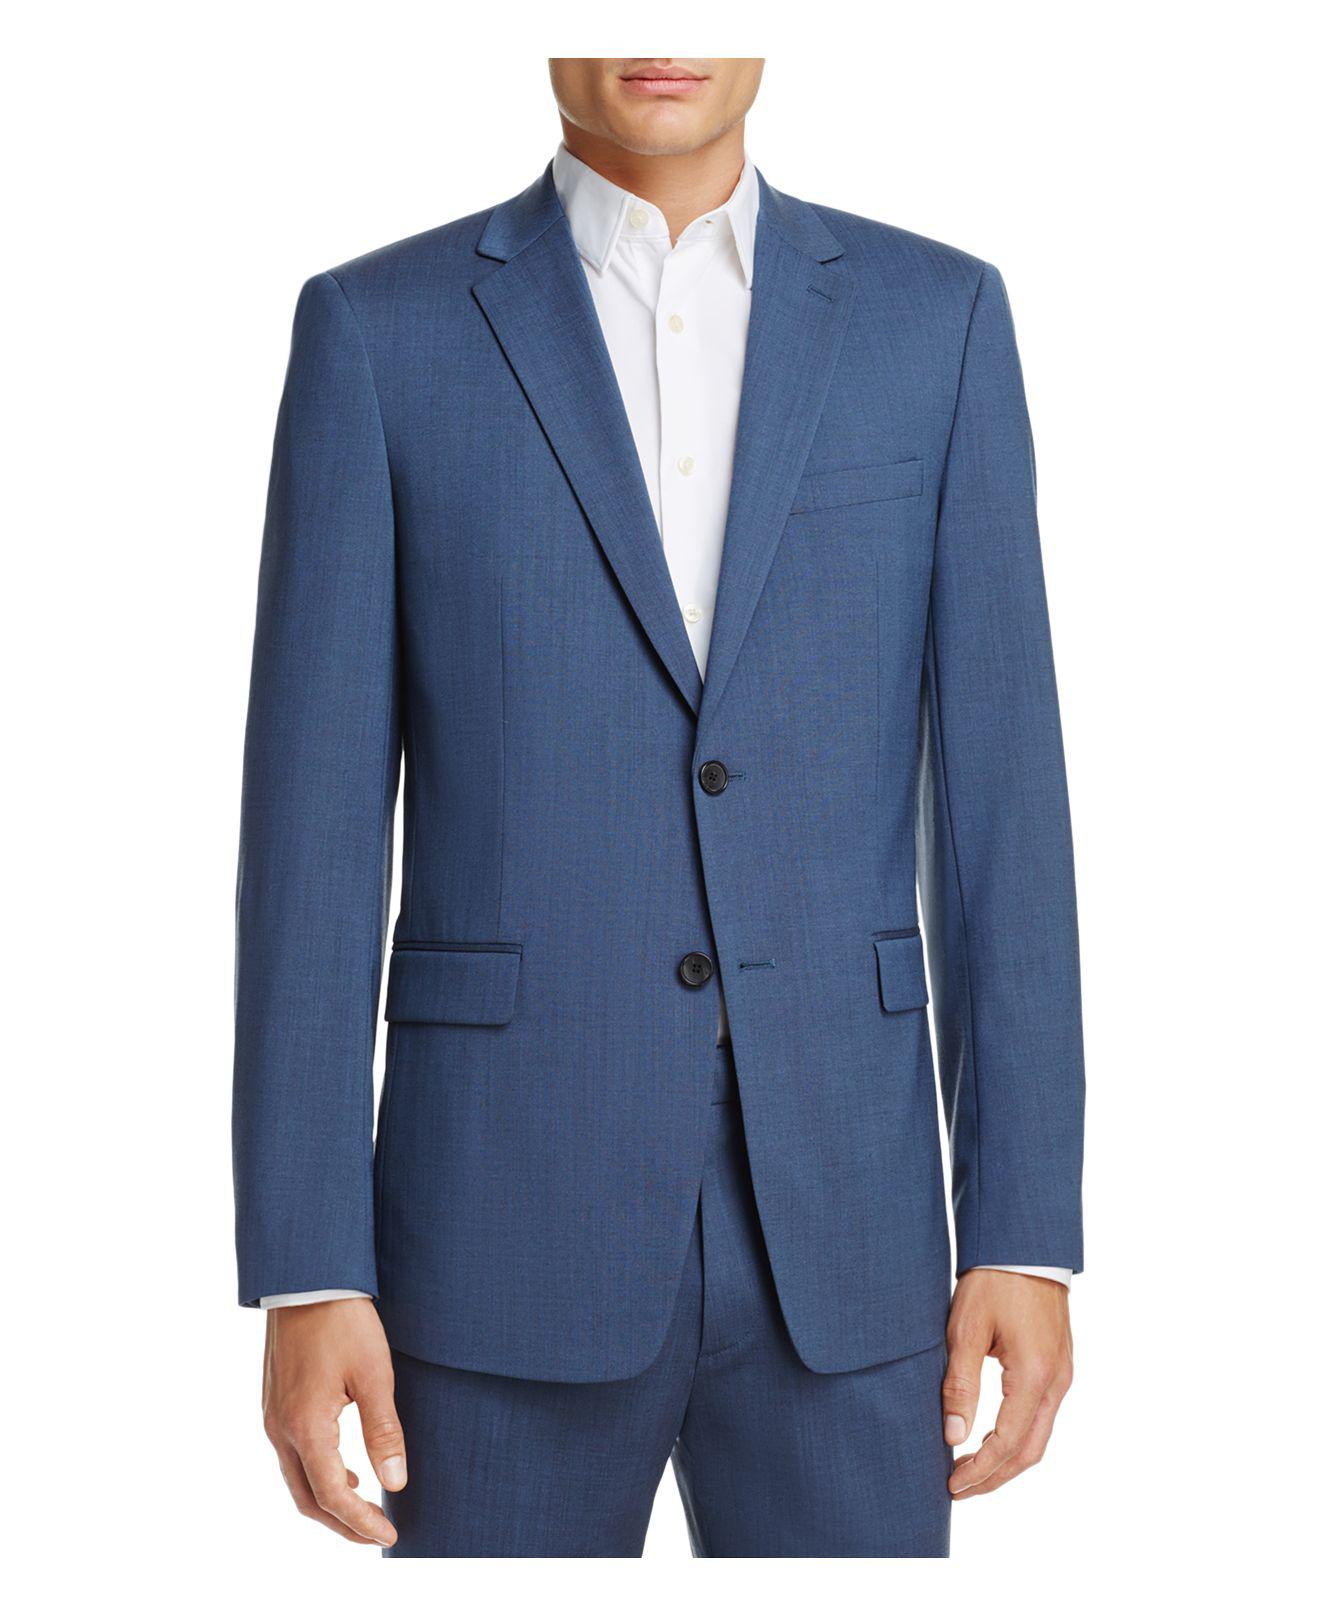 Lyst - Theory New Tailor Slim Fit Sport Coat in Blue for Men